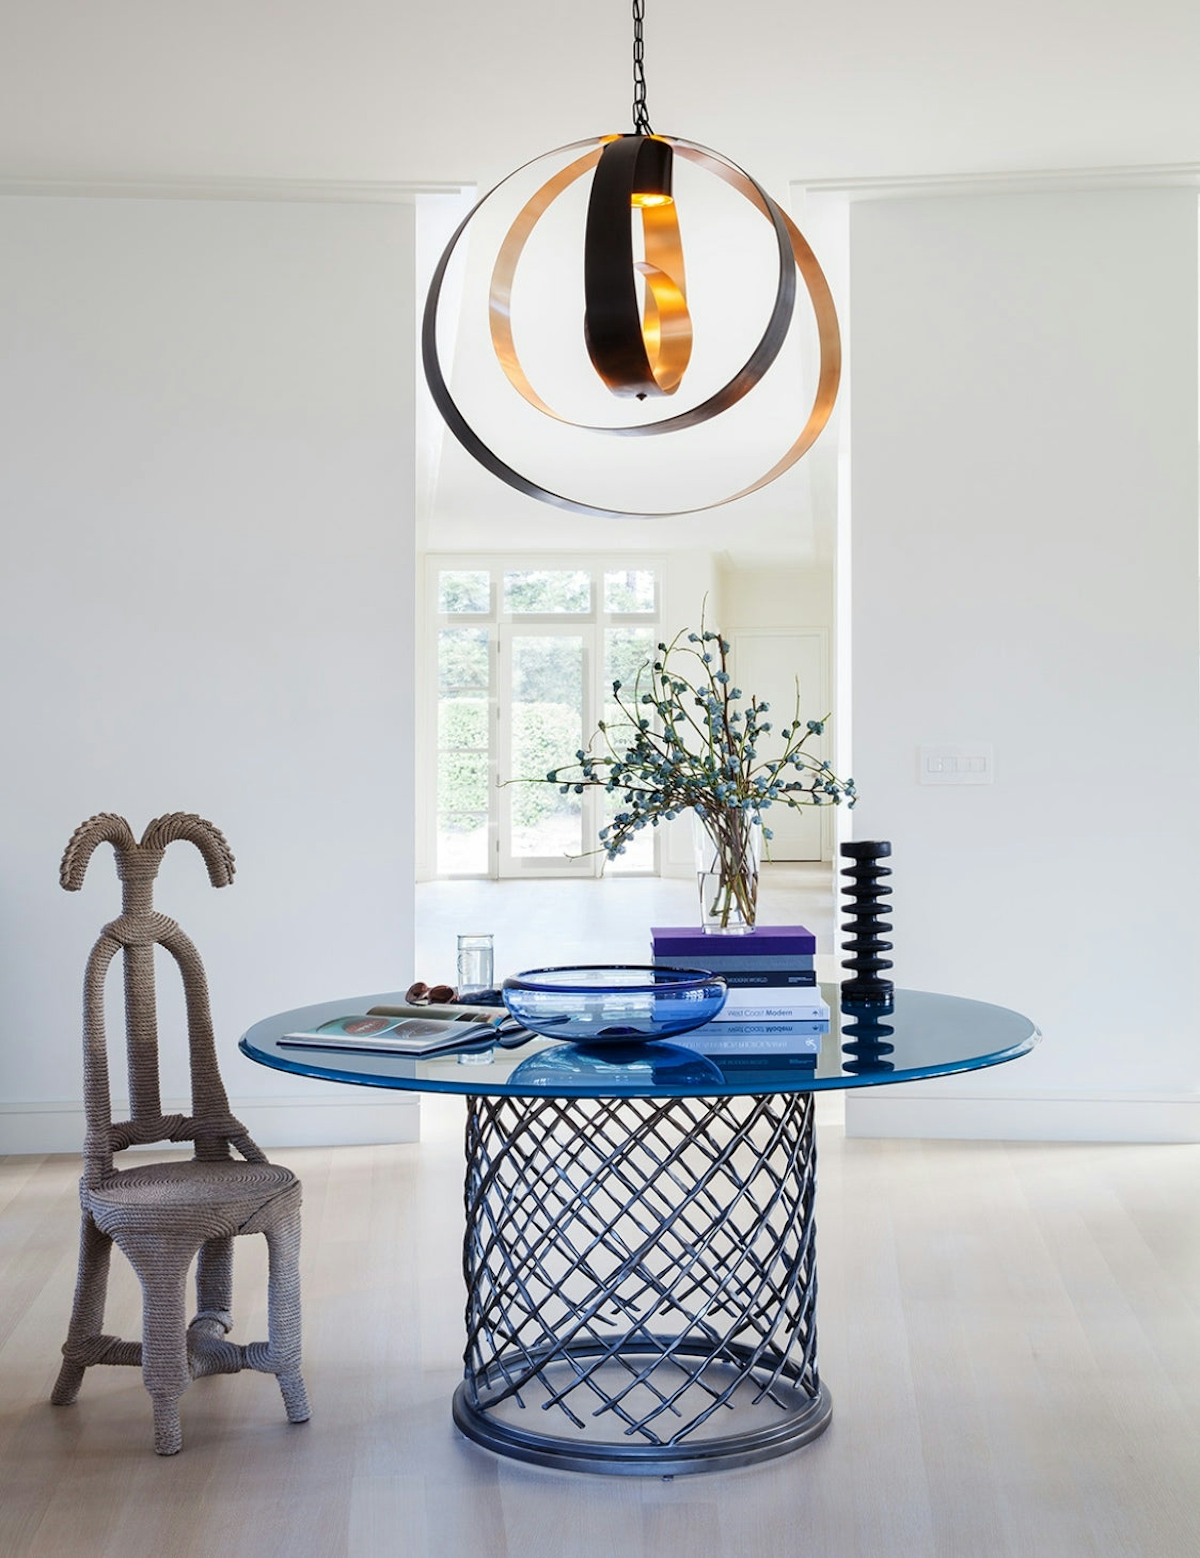 How To Style Your Round Entryway Table – Heather Hilliard – LuxDeco.com Style Guide